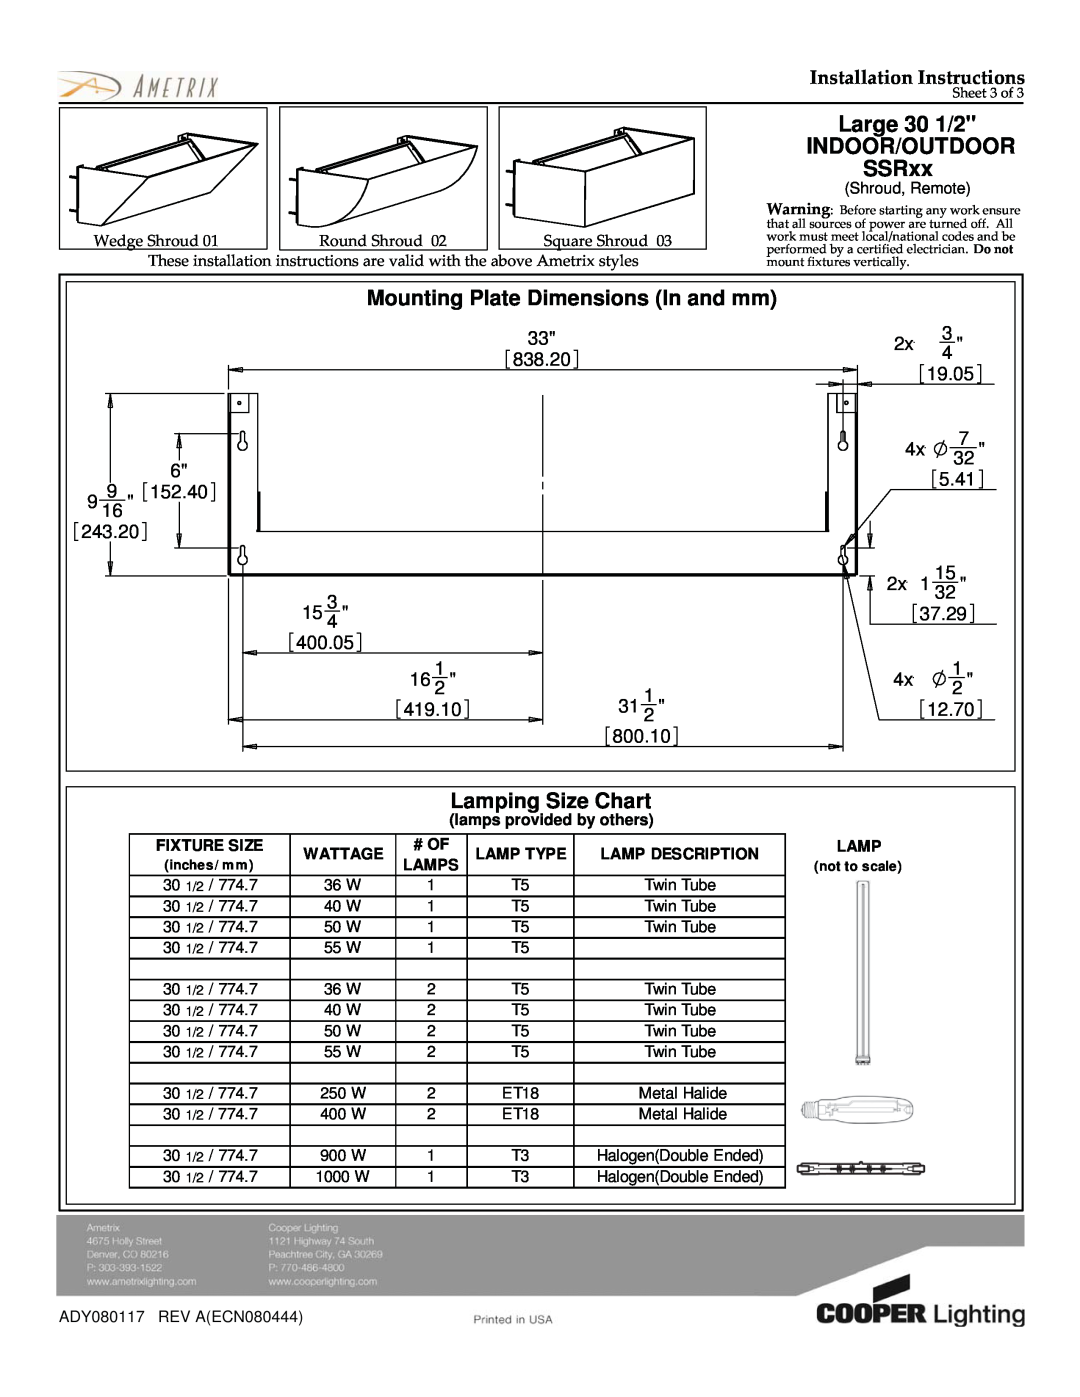 Cooper Lighting ADY080117 Large 30 1/2 INDOOR/OUTDOOR SSRxx, Mounting Plate Dimensions In and mm, Lamping Size Chart 